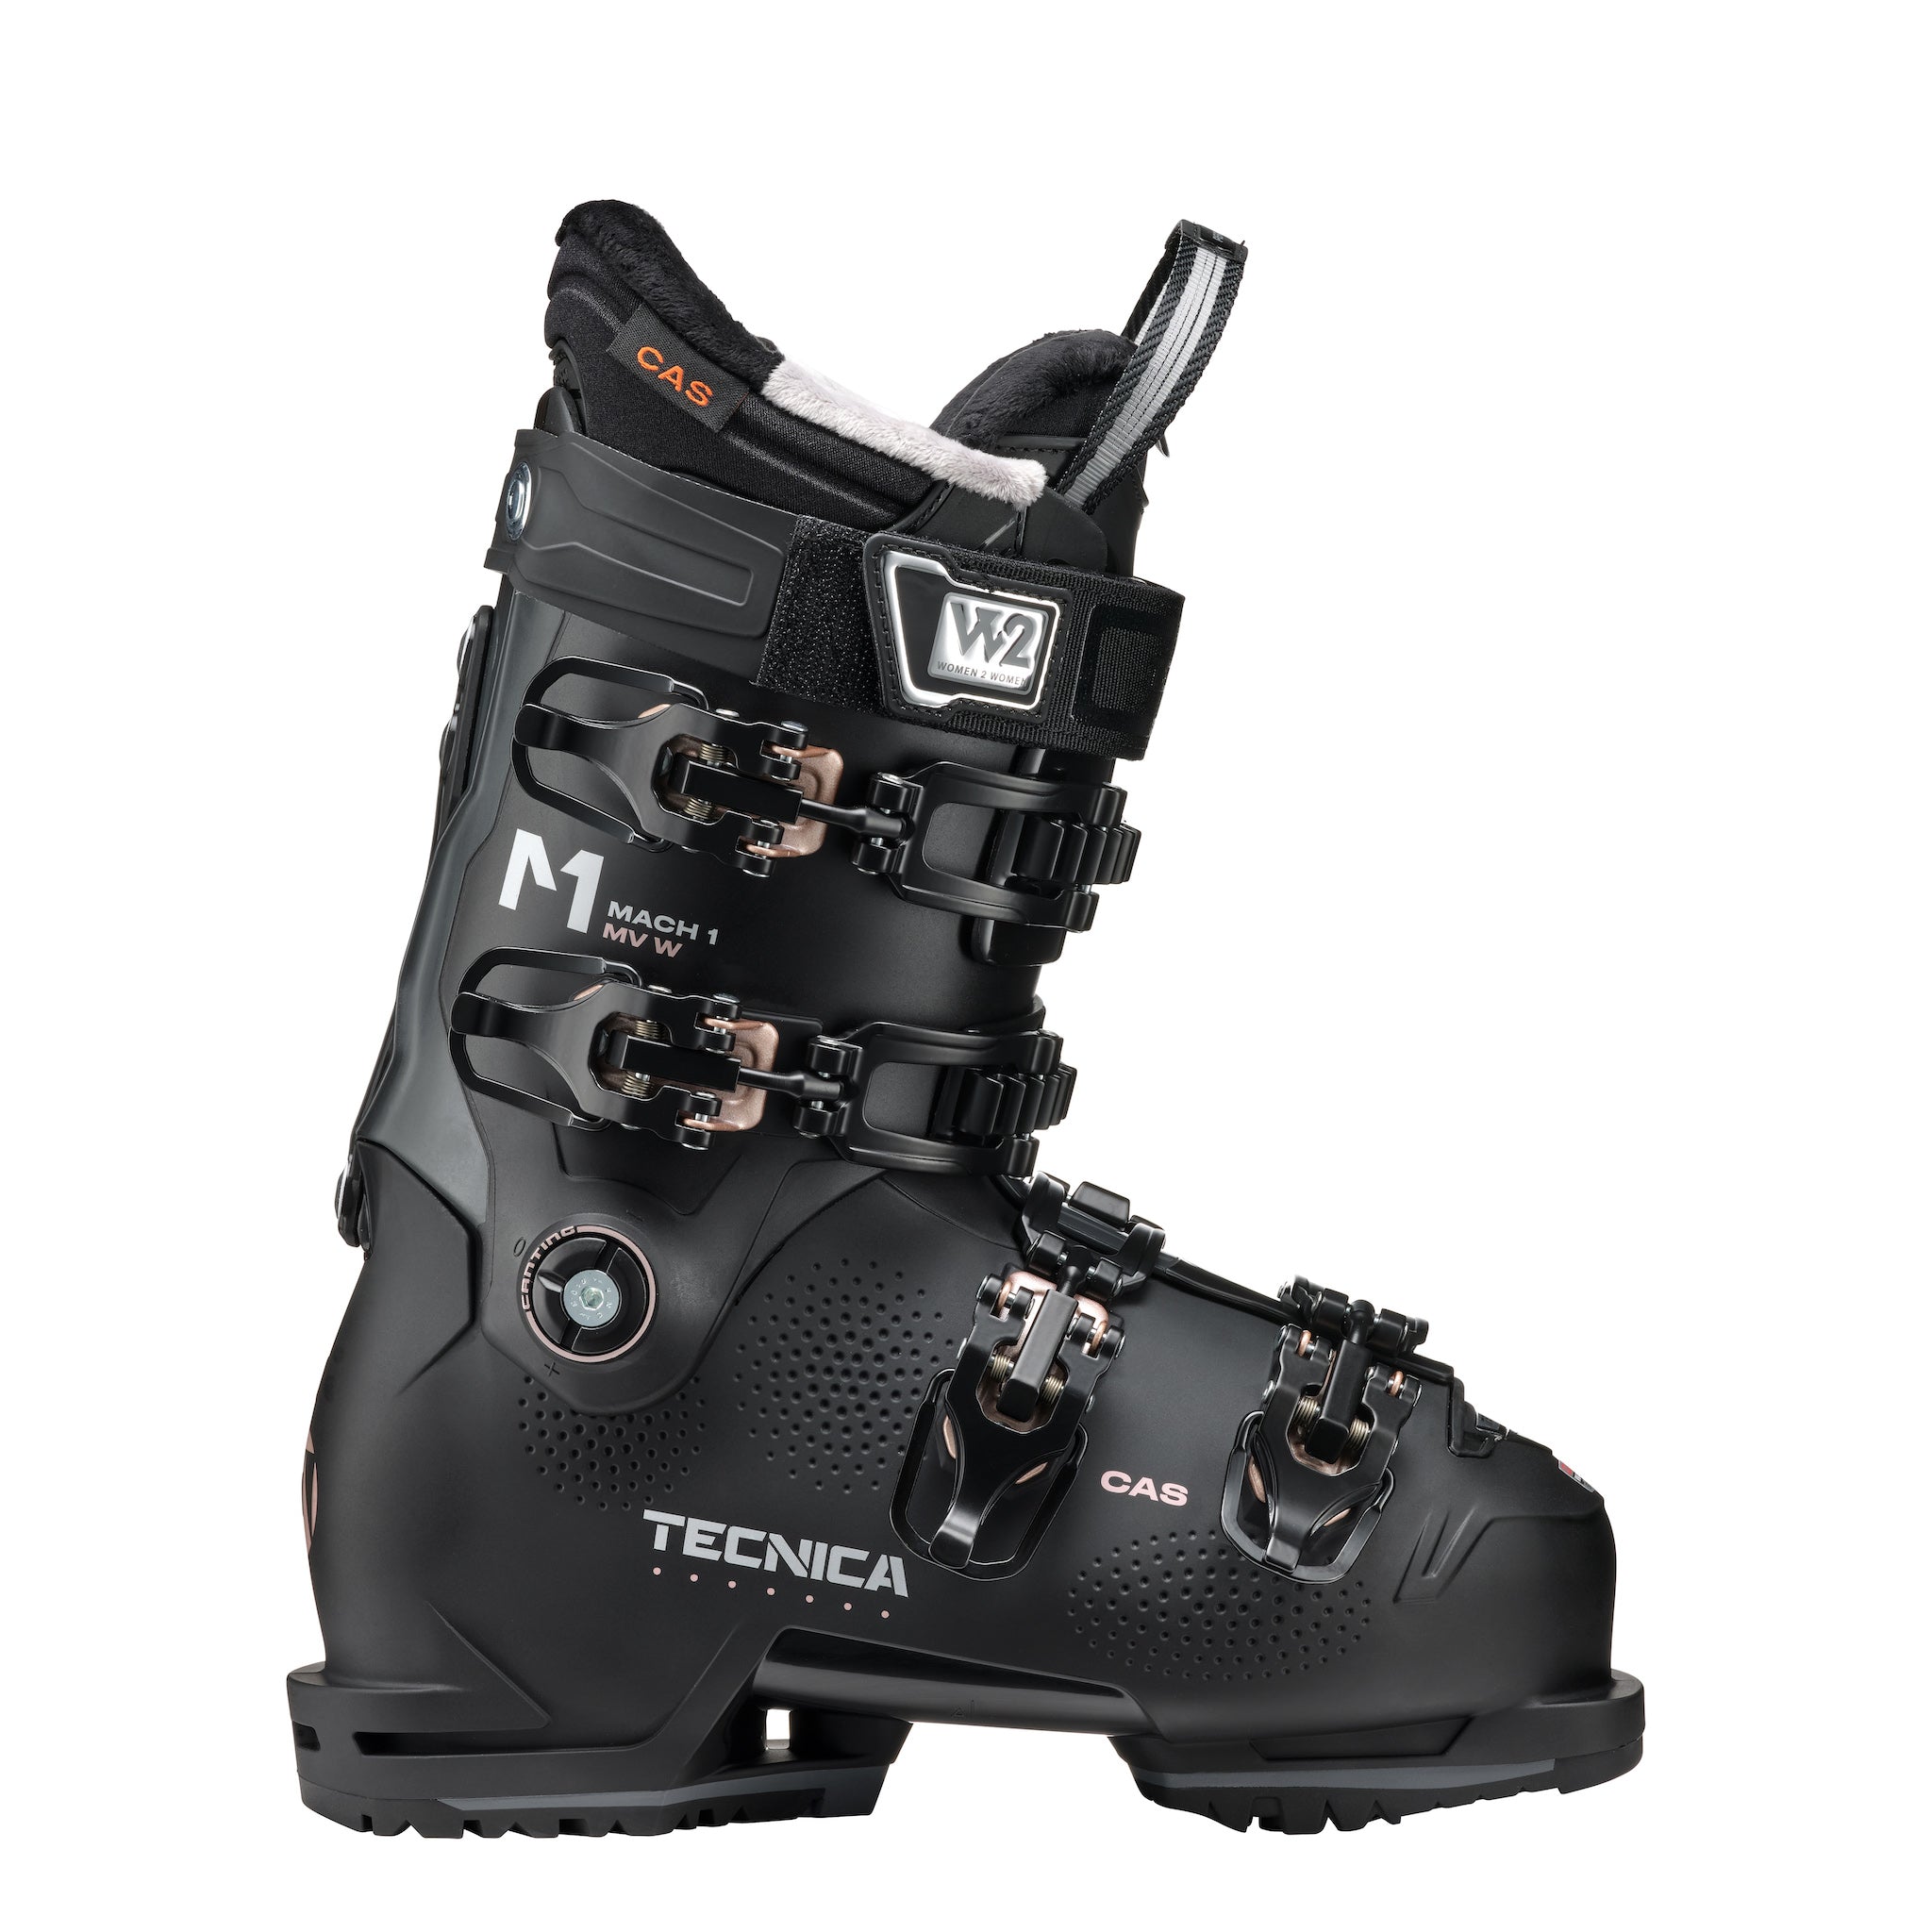 Women's Tecnica Mach1 MV 105 ski boot all black with minimal rose gold accents.